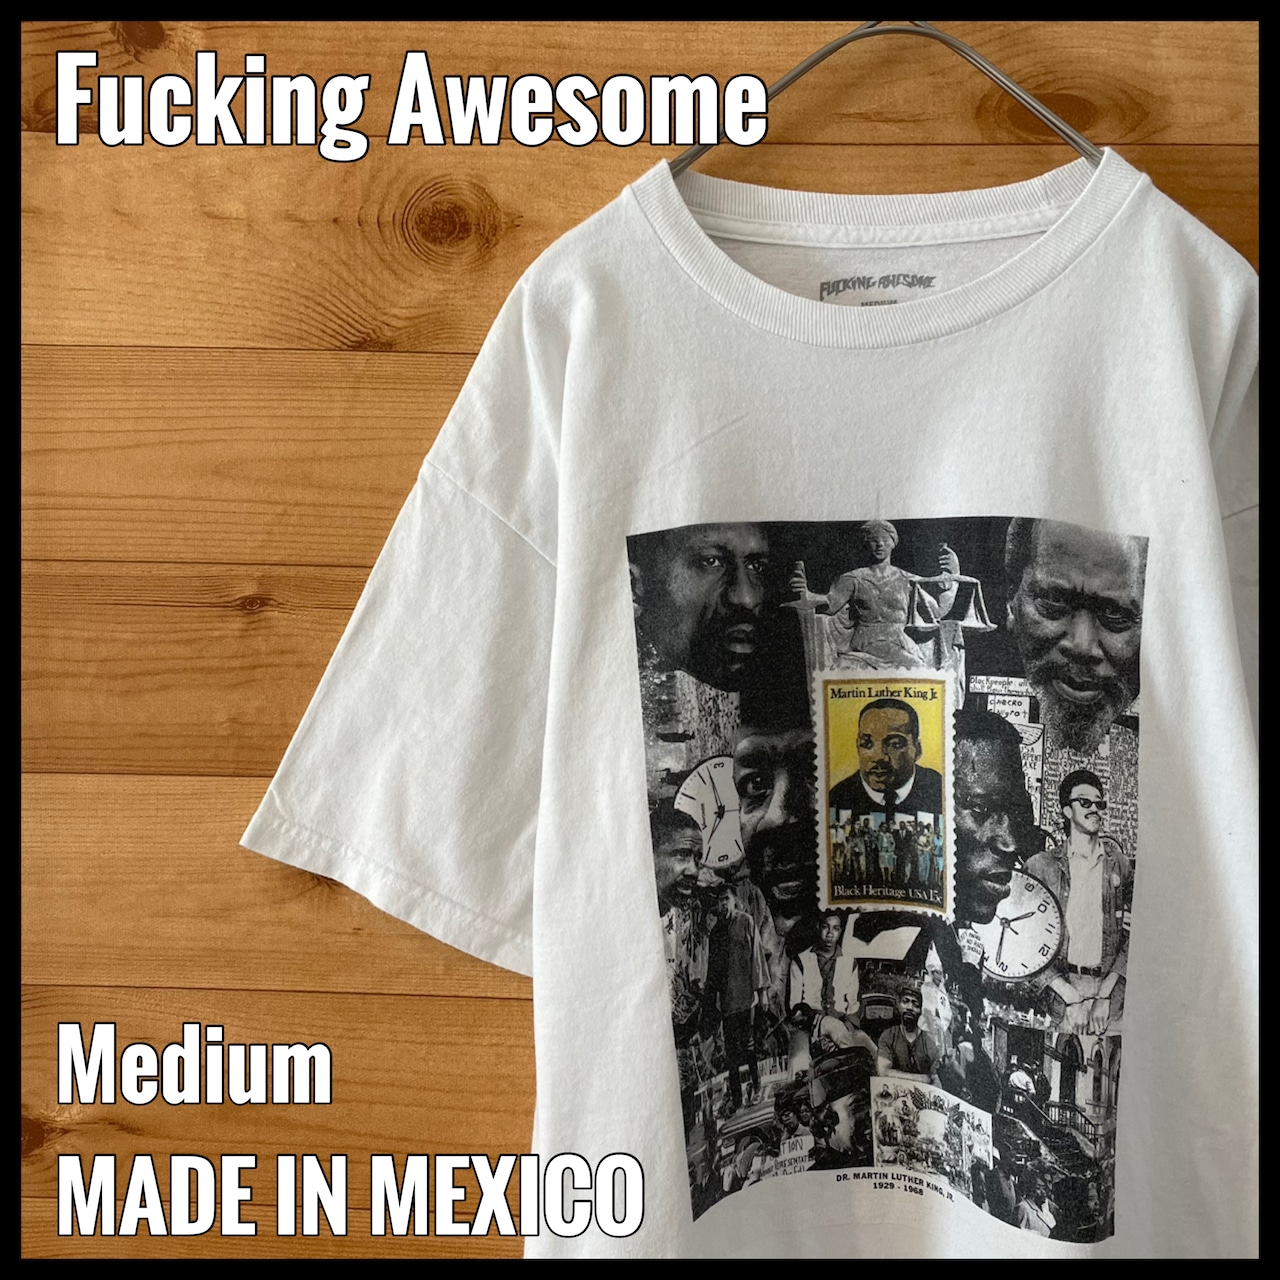 【Fucking Awesome】キング牧師 フォトプリント Tシャツ M ファッキンオーサム US古着 アメリカ古着